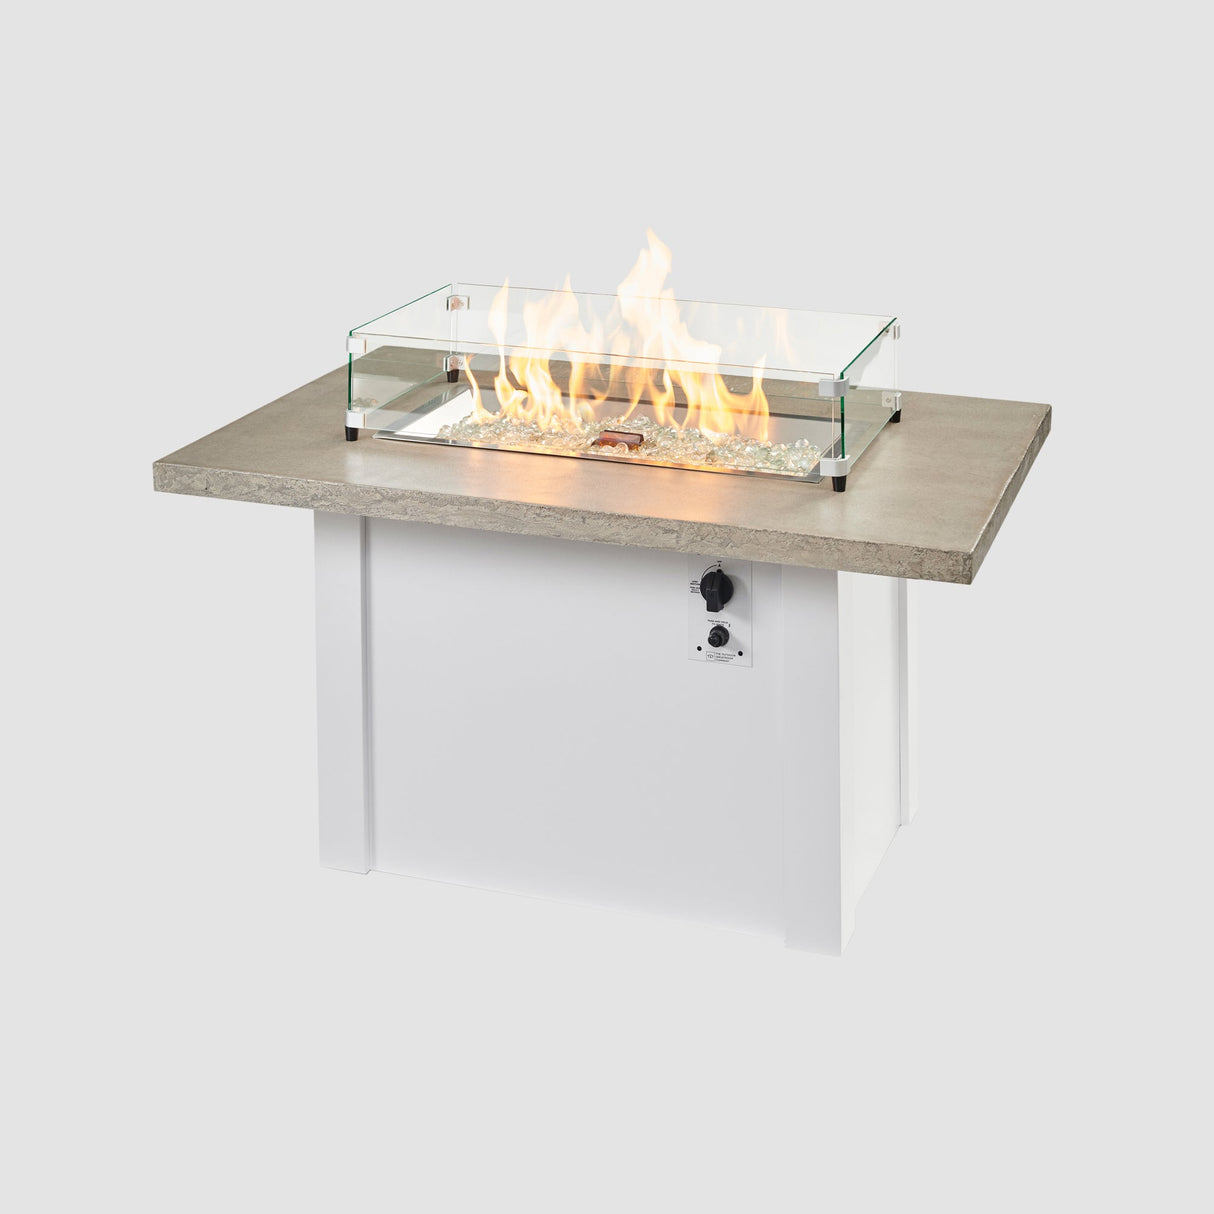 A glass wind guard used on the burner of a Havenwood Rectangular Gas Fire Table with a Pebble Grey top and White base